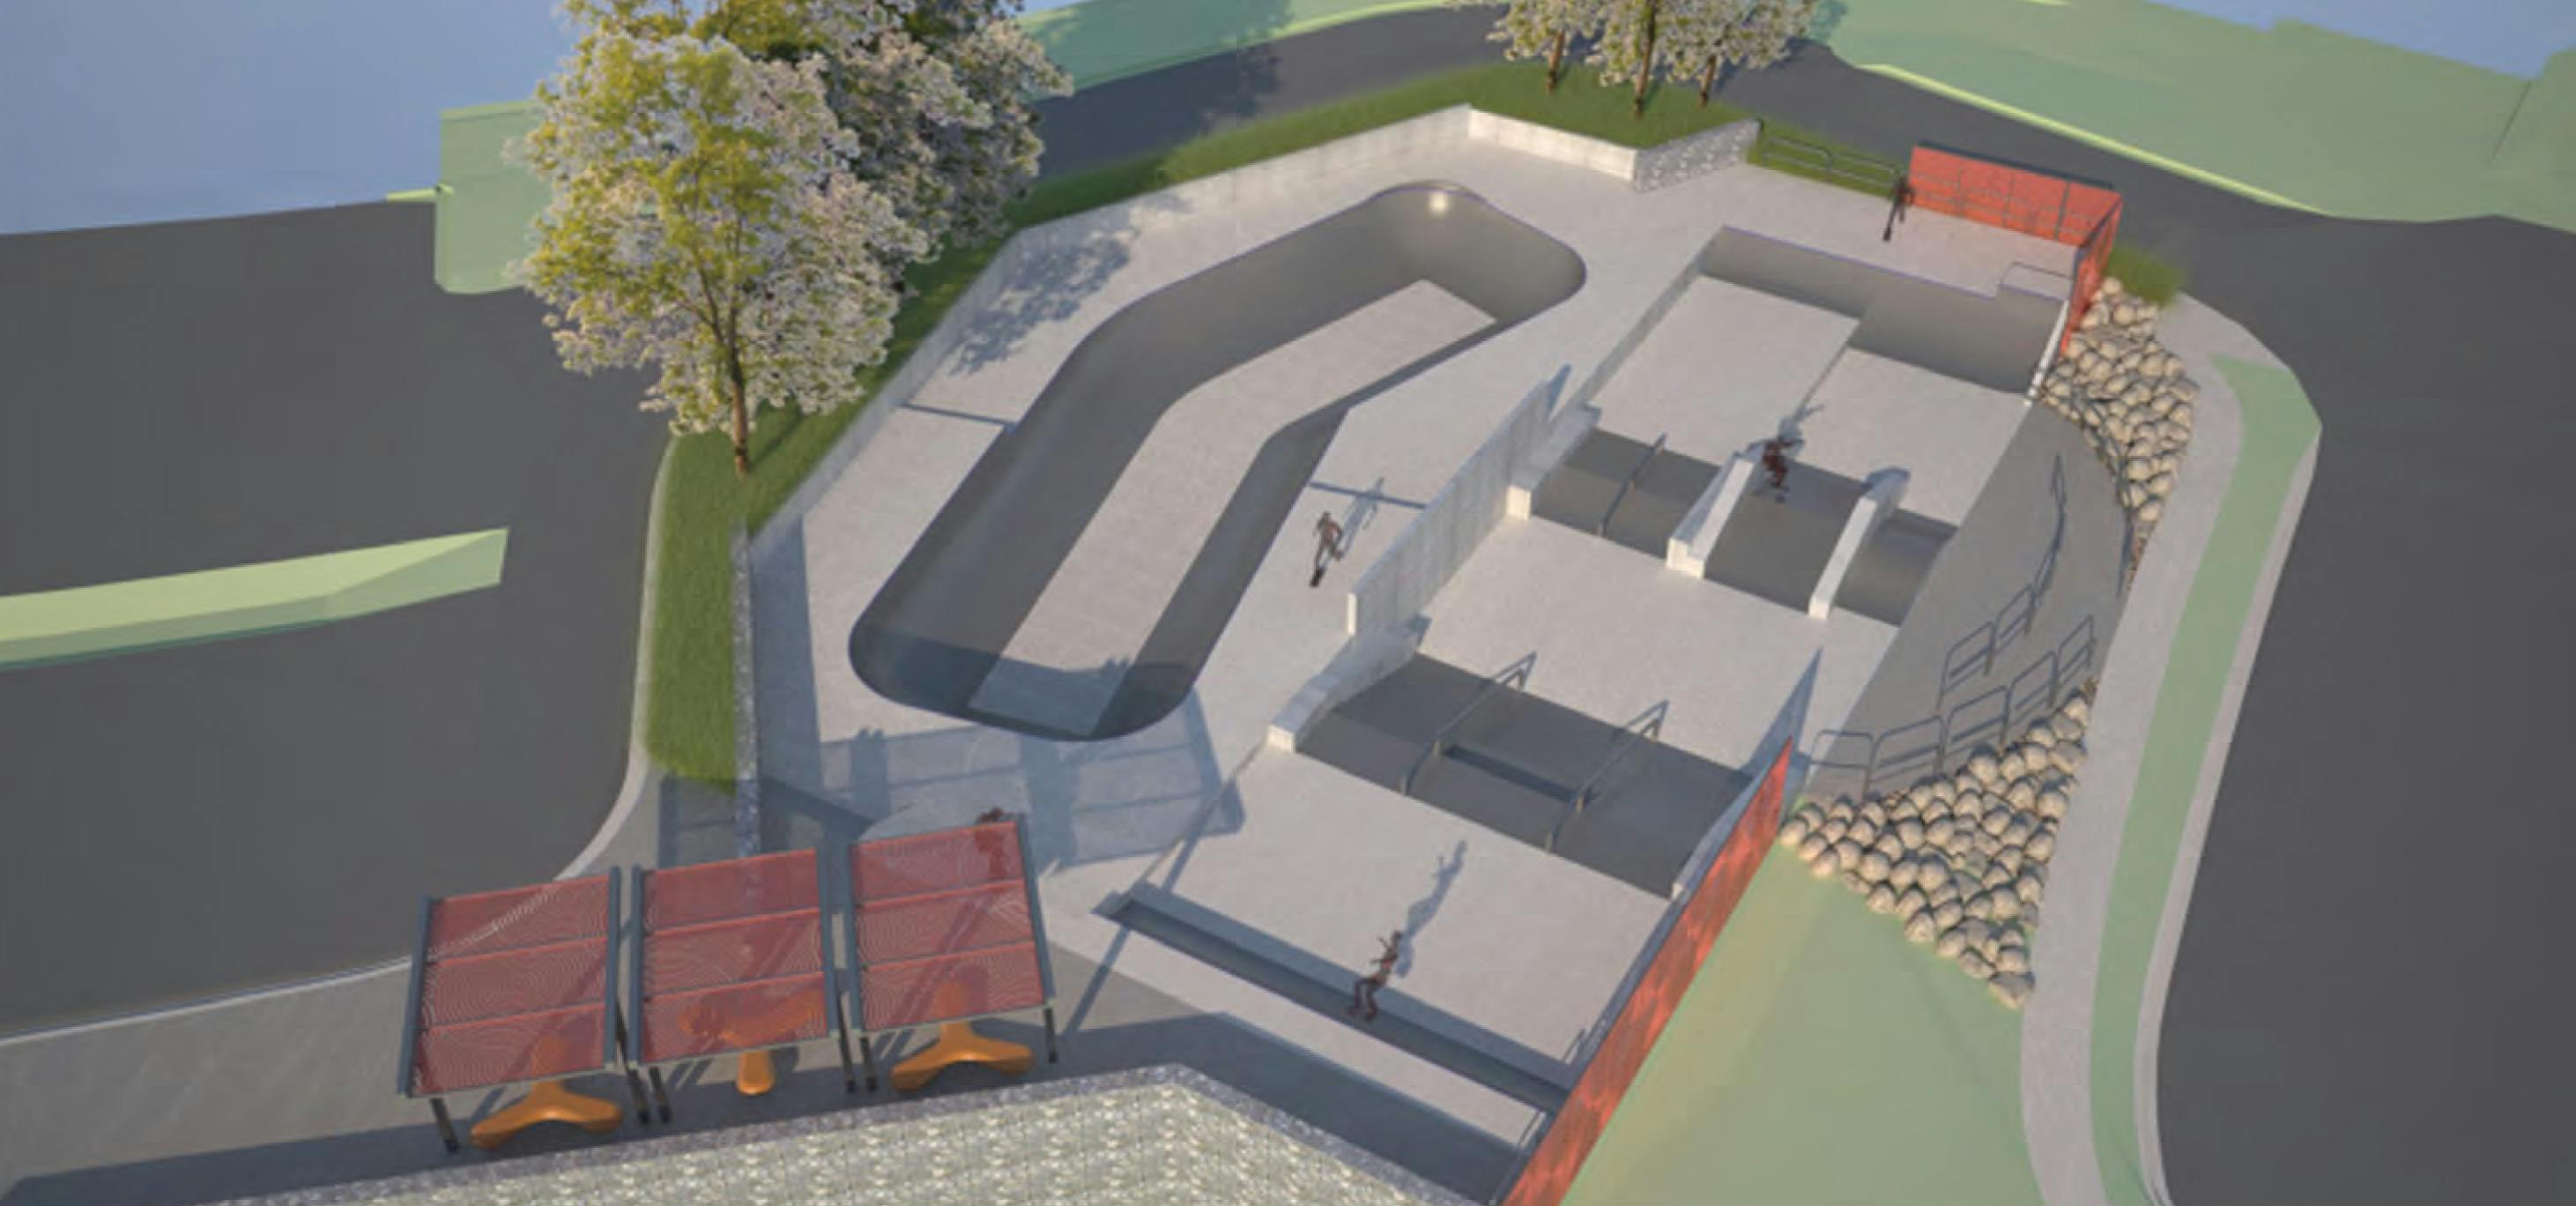 Proposed skate park perspective 3